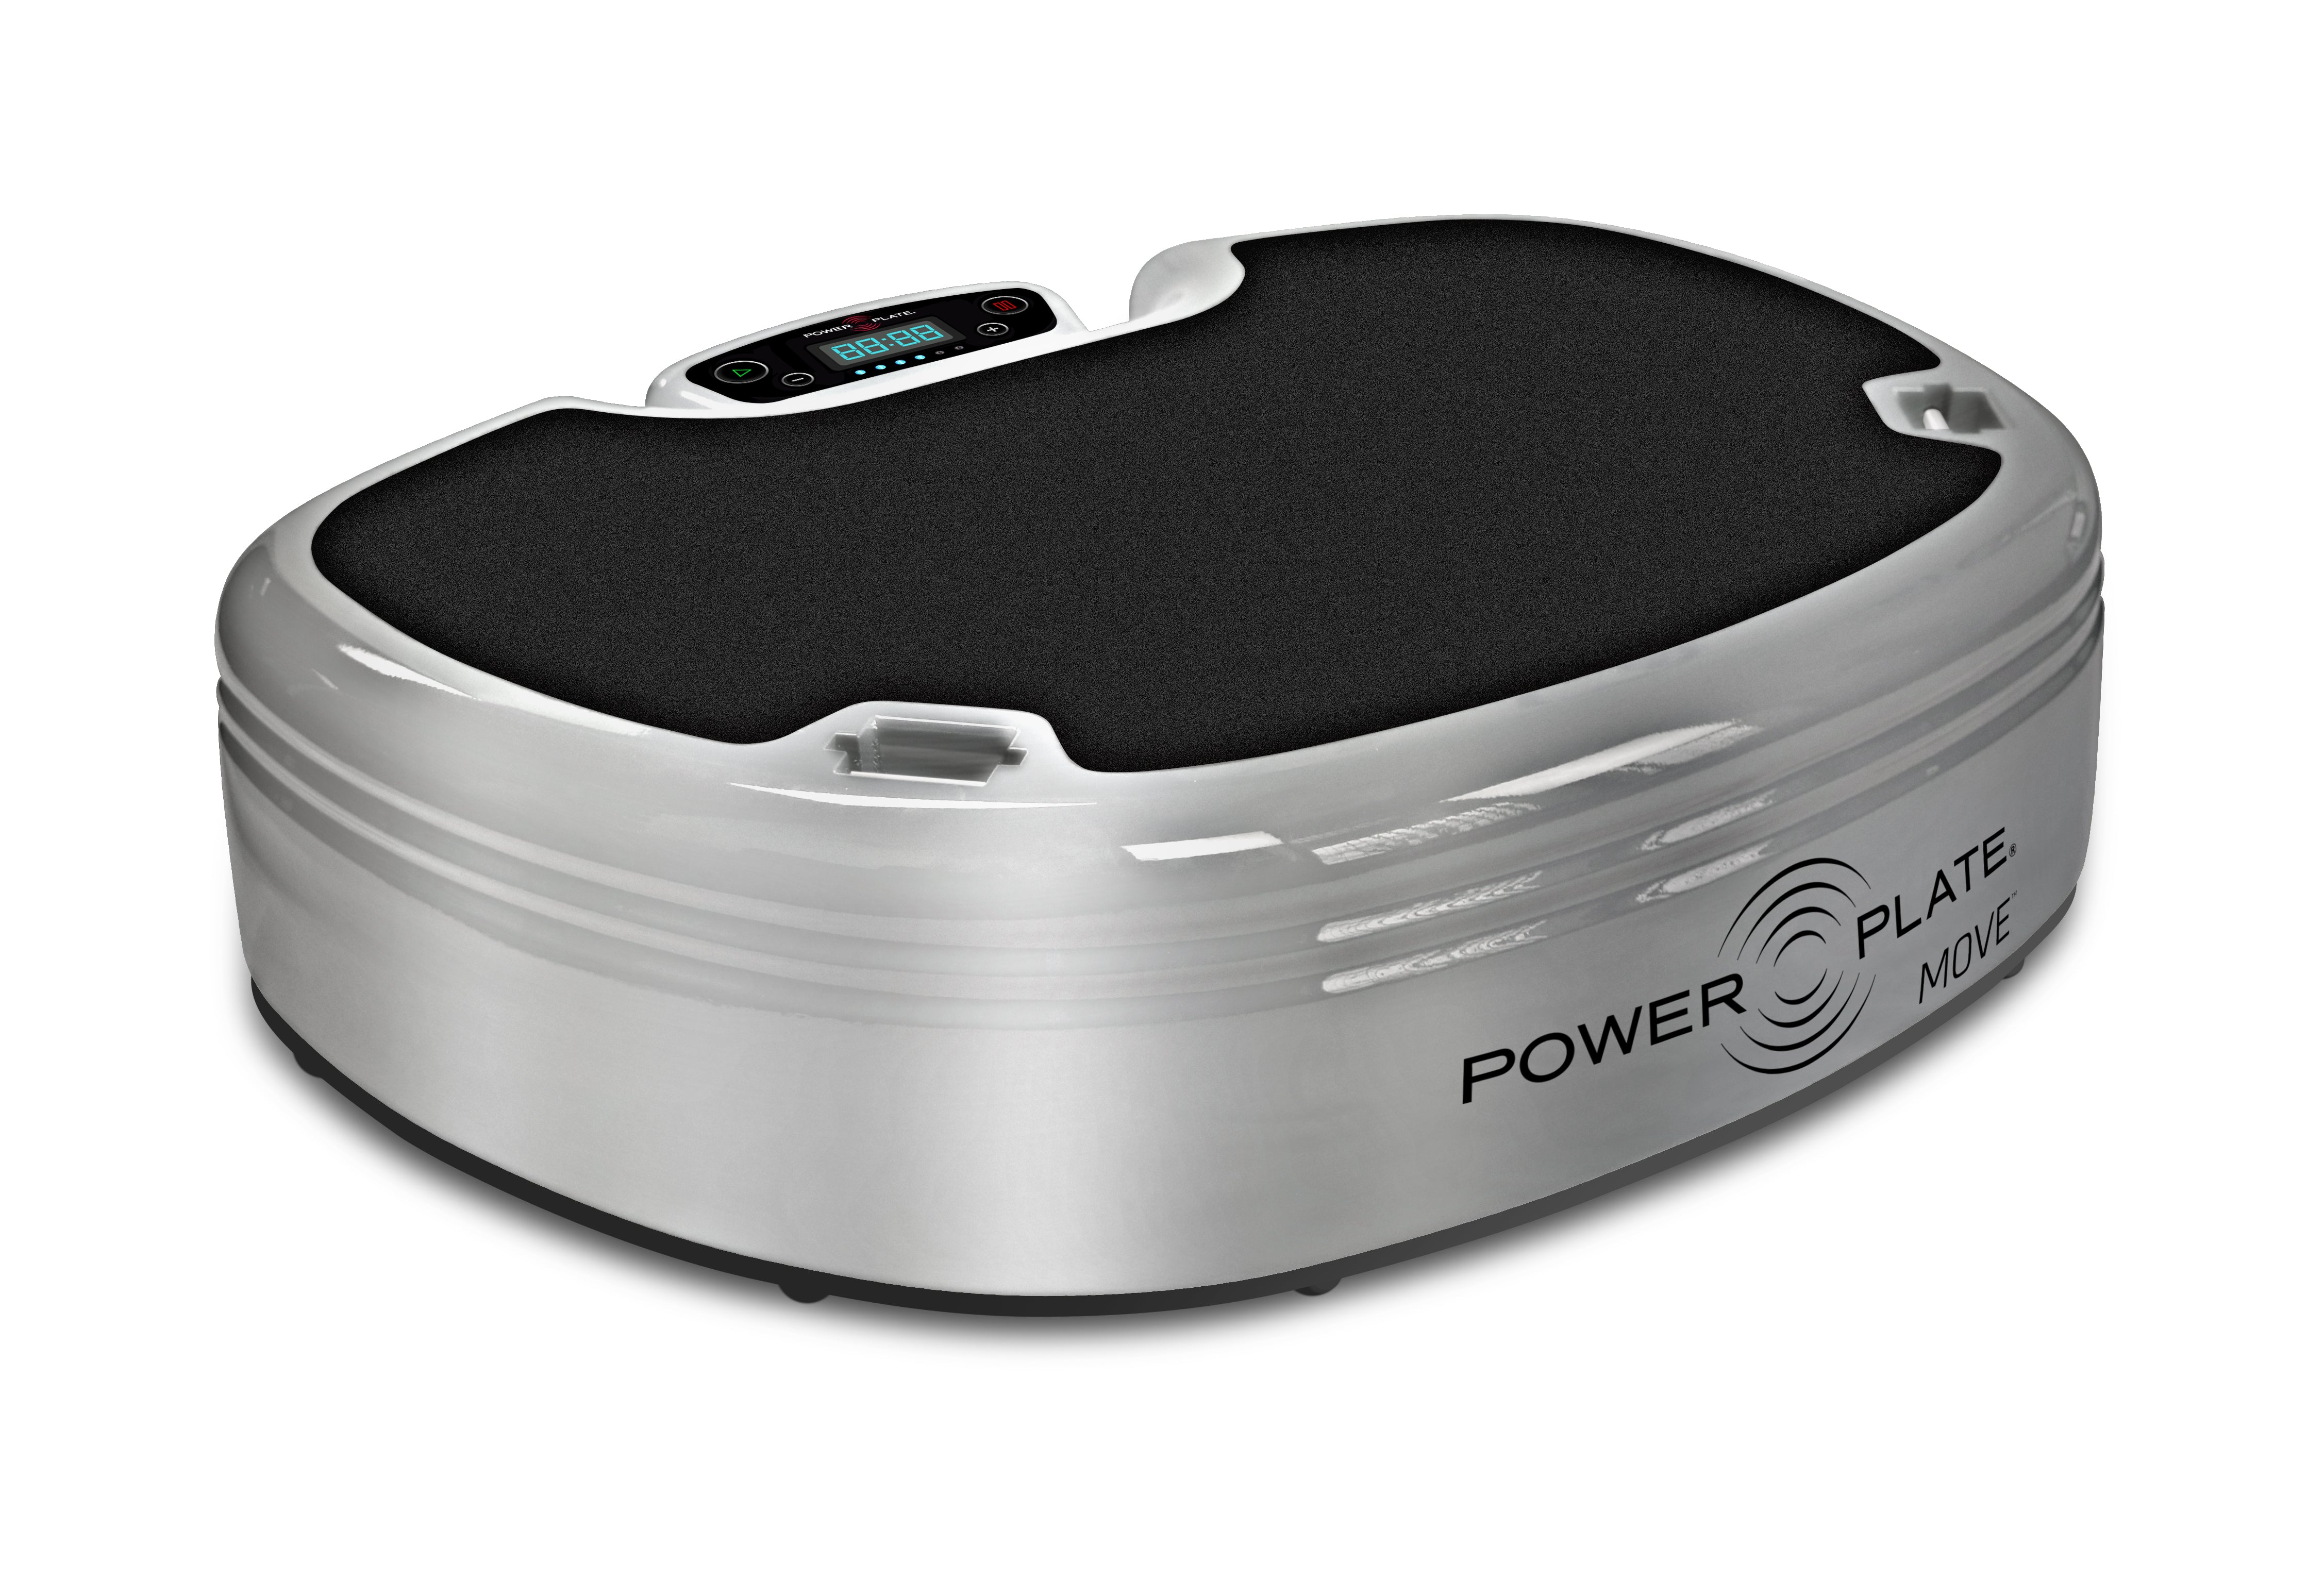 Power Plate MOVE Vibration Plate